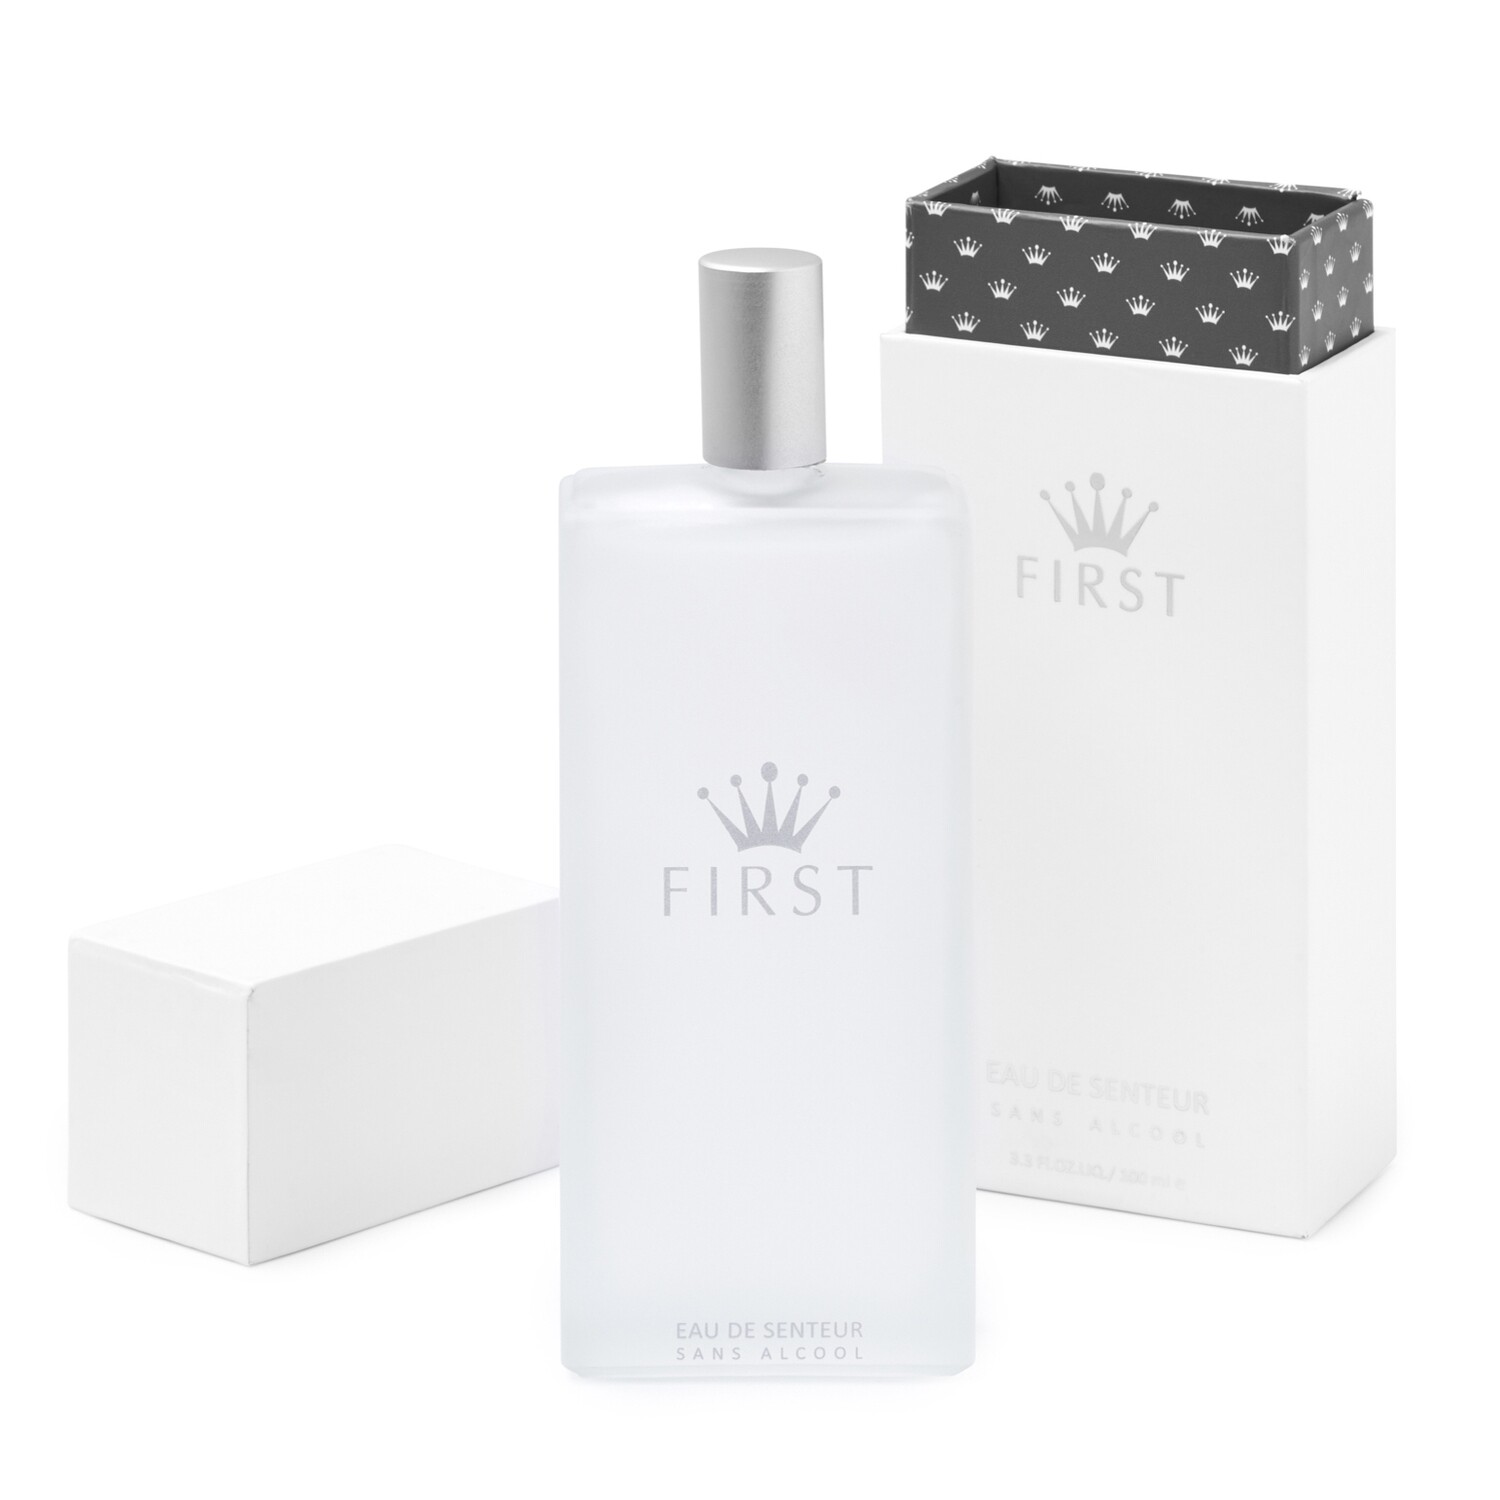 First fragrance